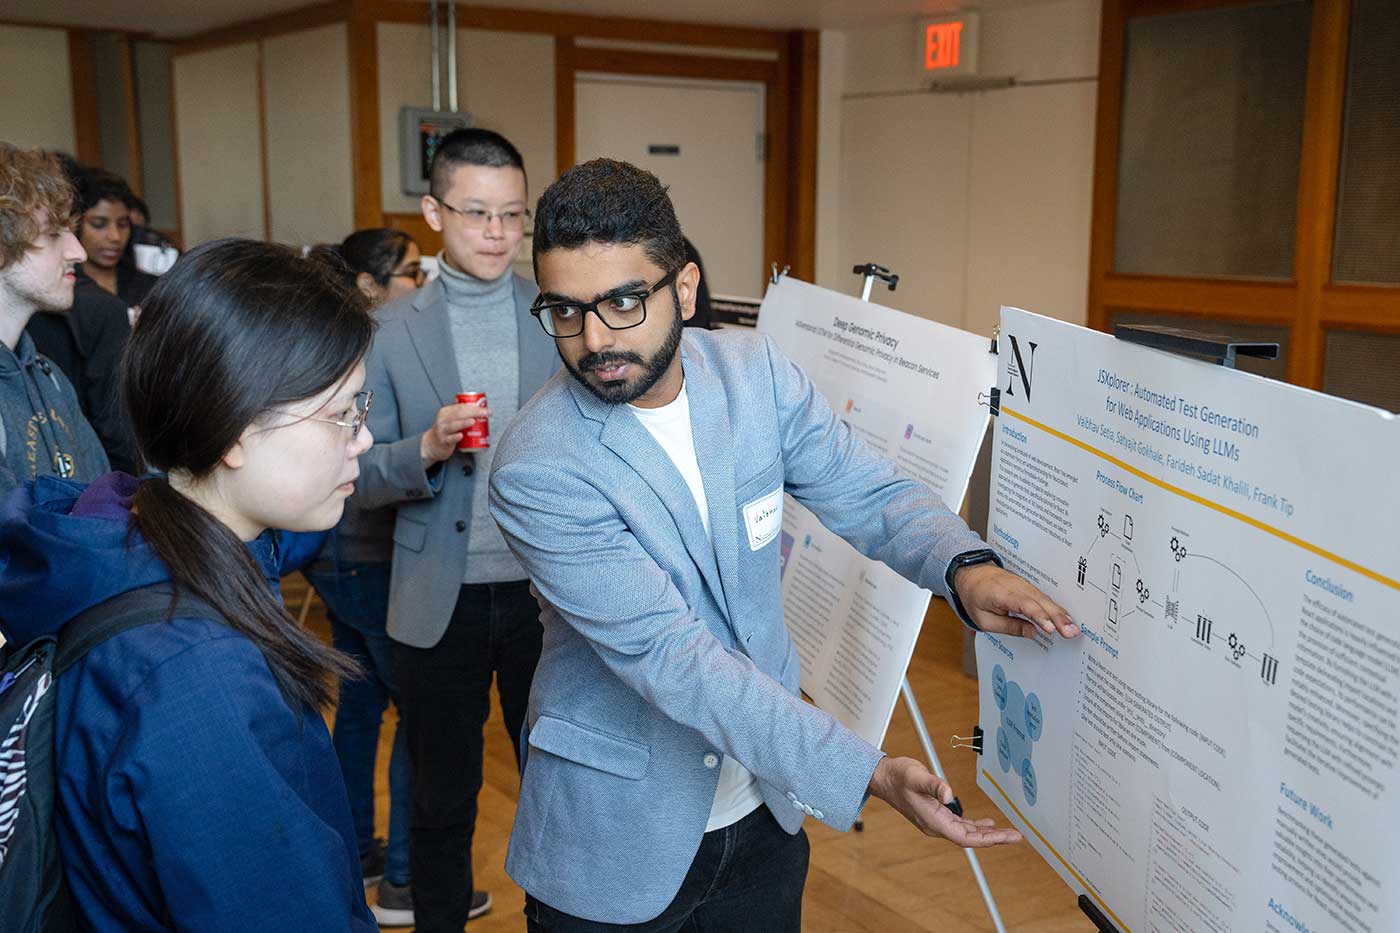 Vaibhav Setia gestures toward his research poster as he talks to another student